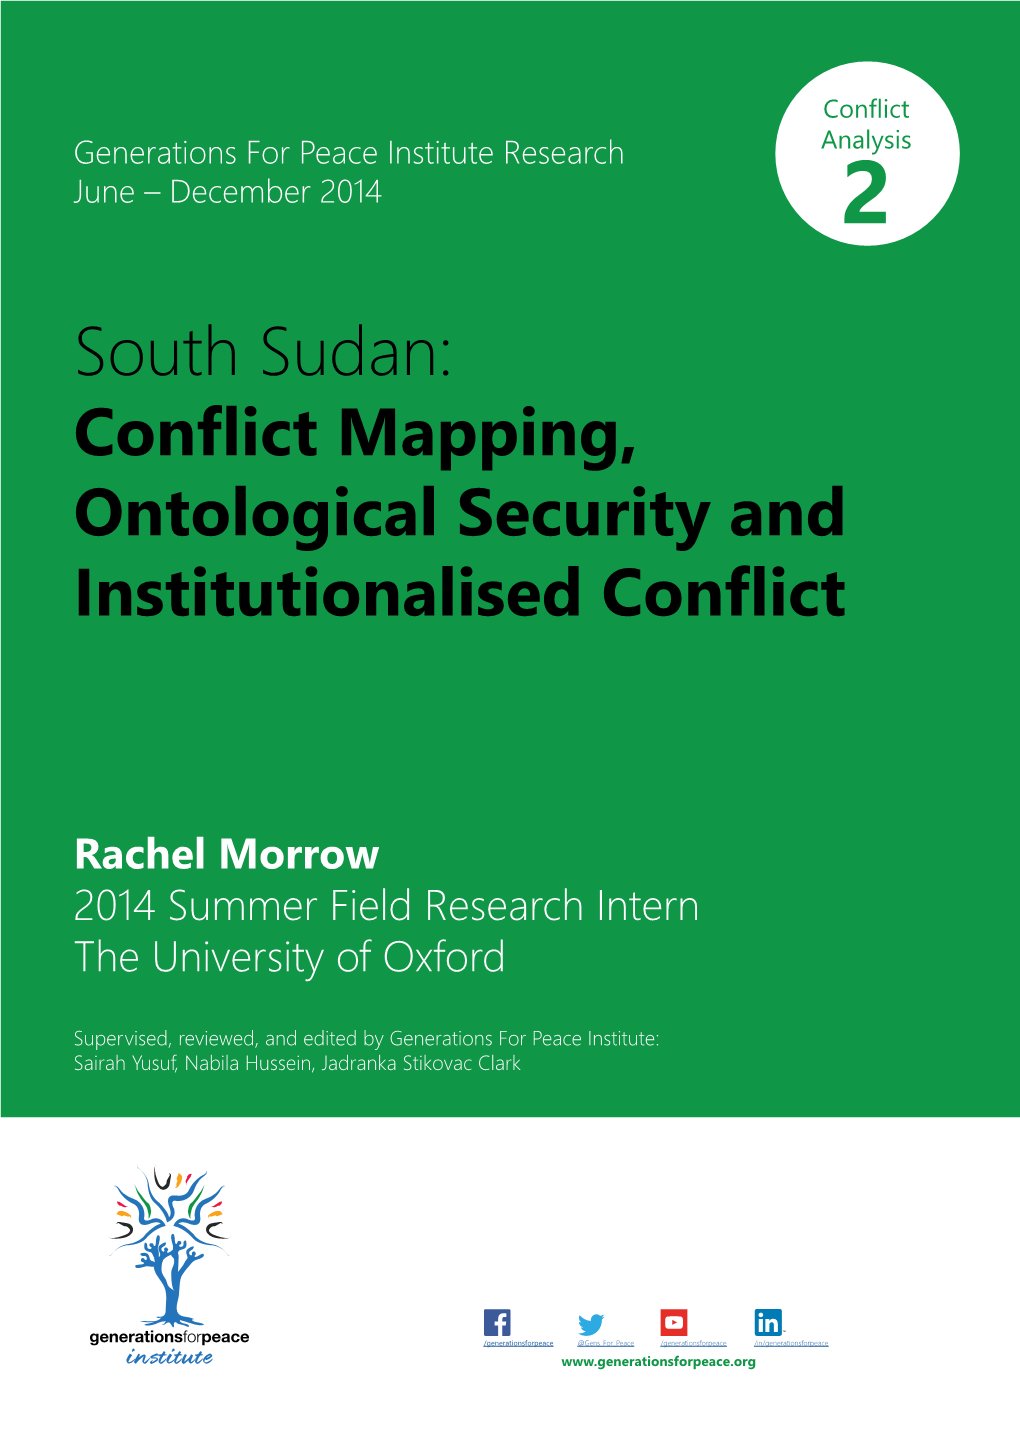 South Sudan: Conflict Mapping, Ontological Security and Institutionalised Conflict